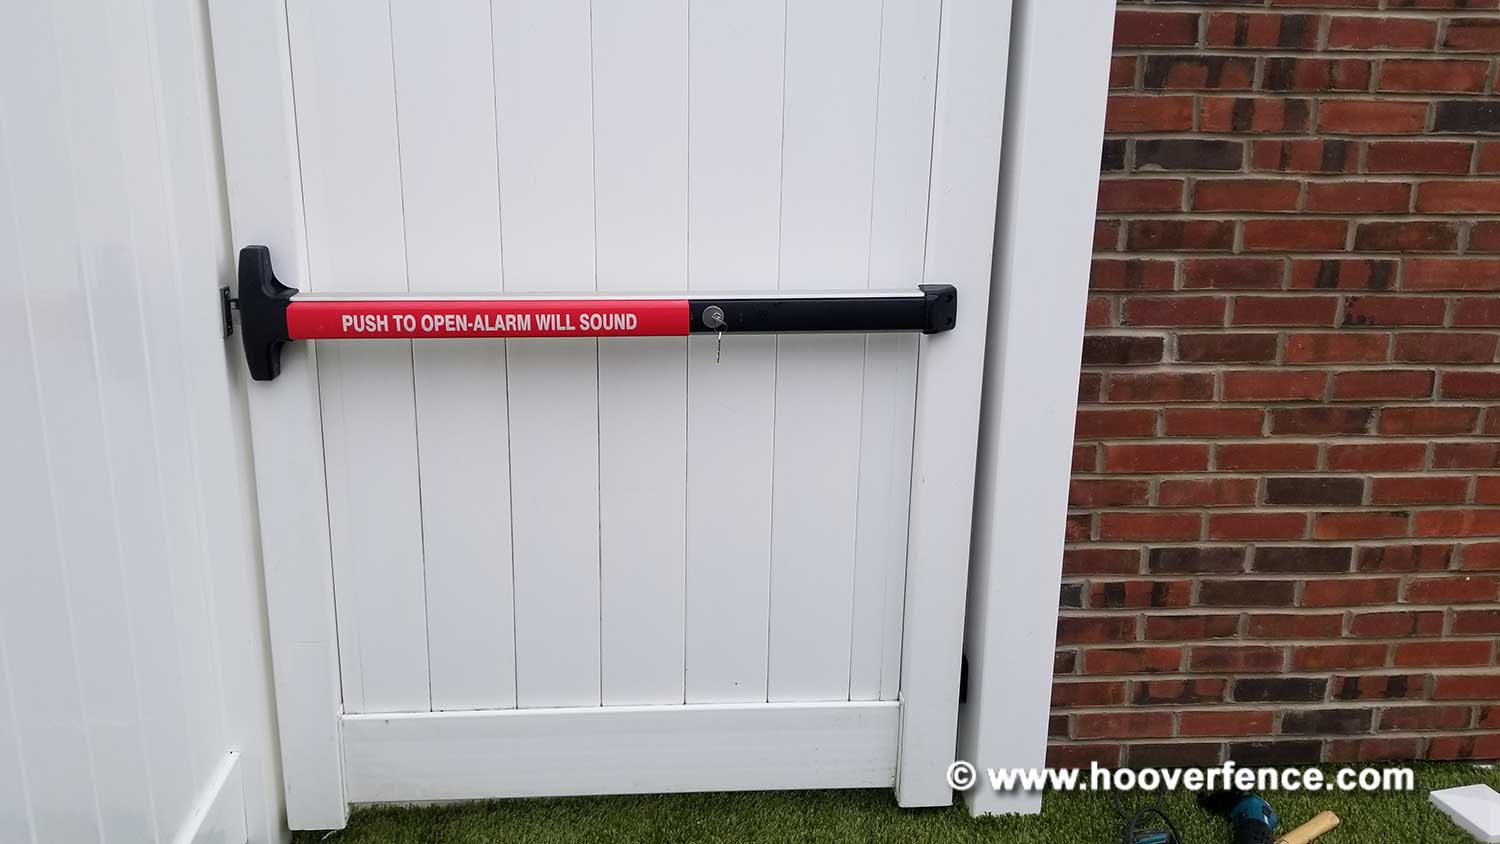 Customer Photos - D-6008 Surface Mount Exit Bar with Alarm Installed on Vinyl Fence Gate - Glenside, PA